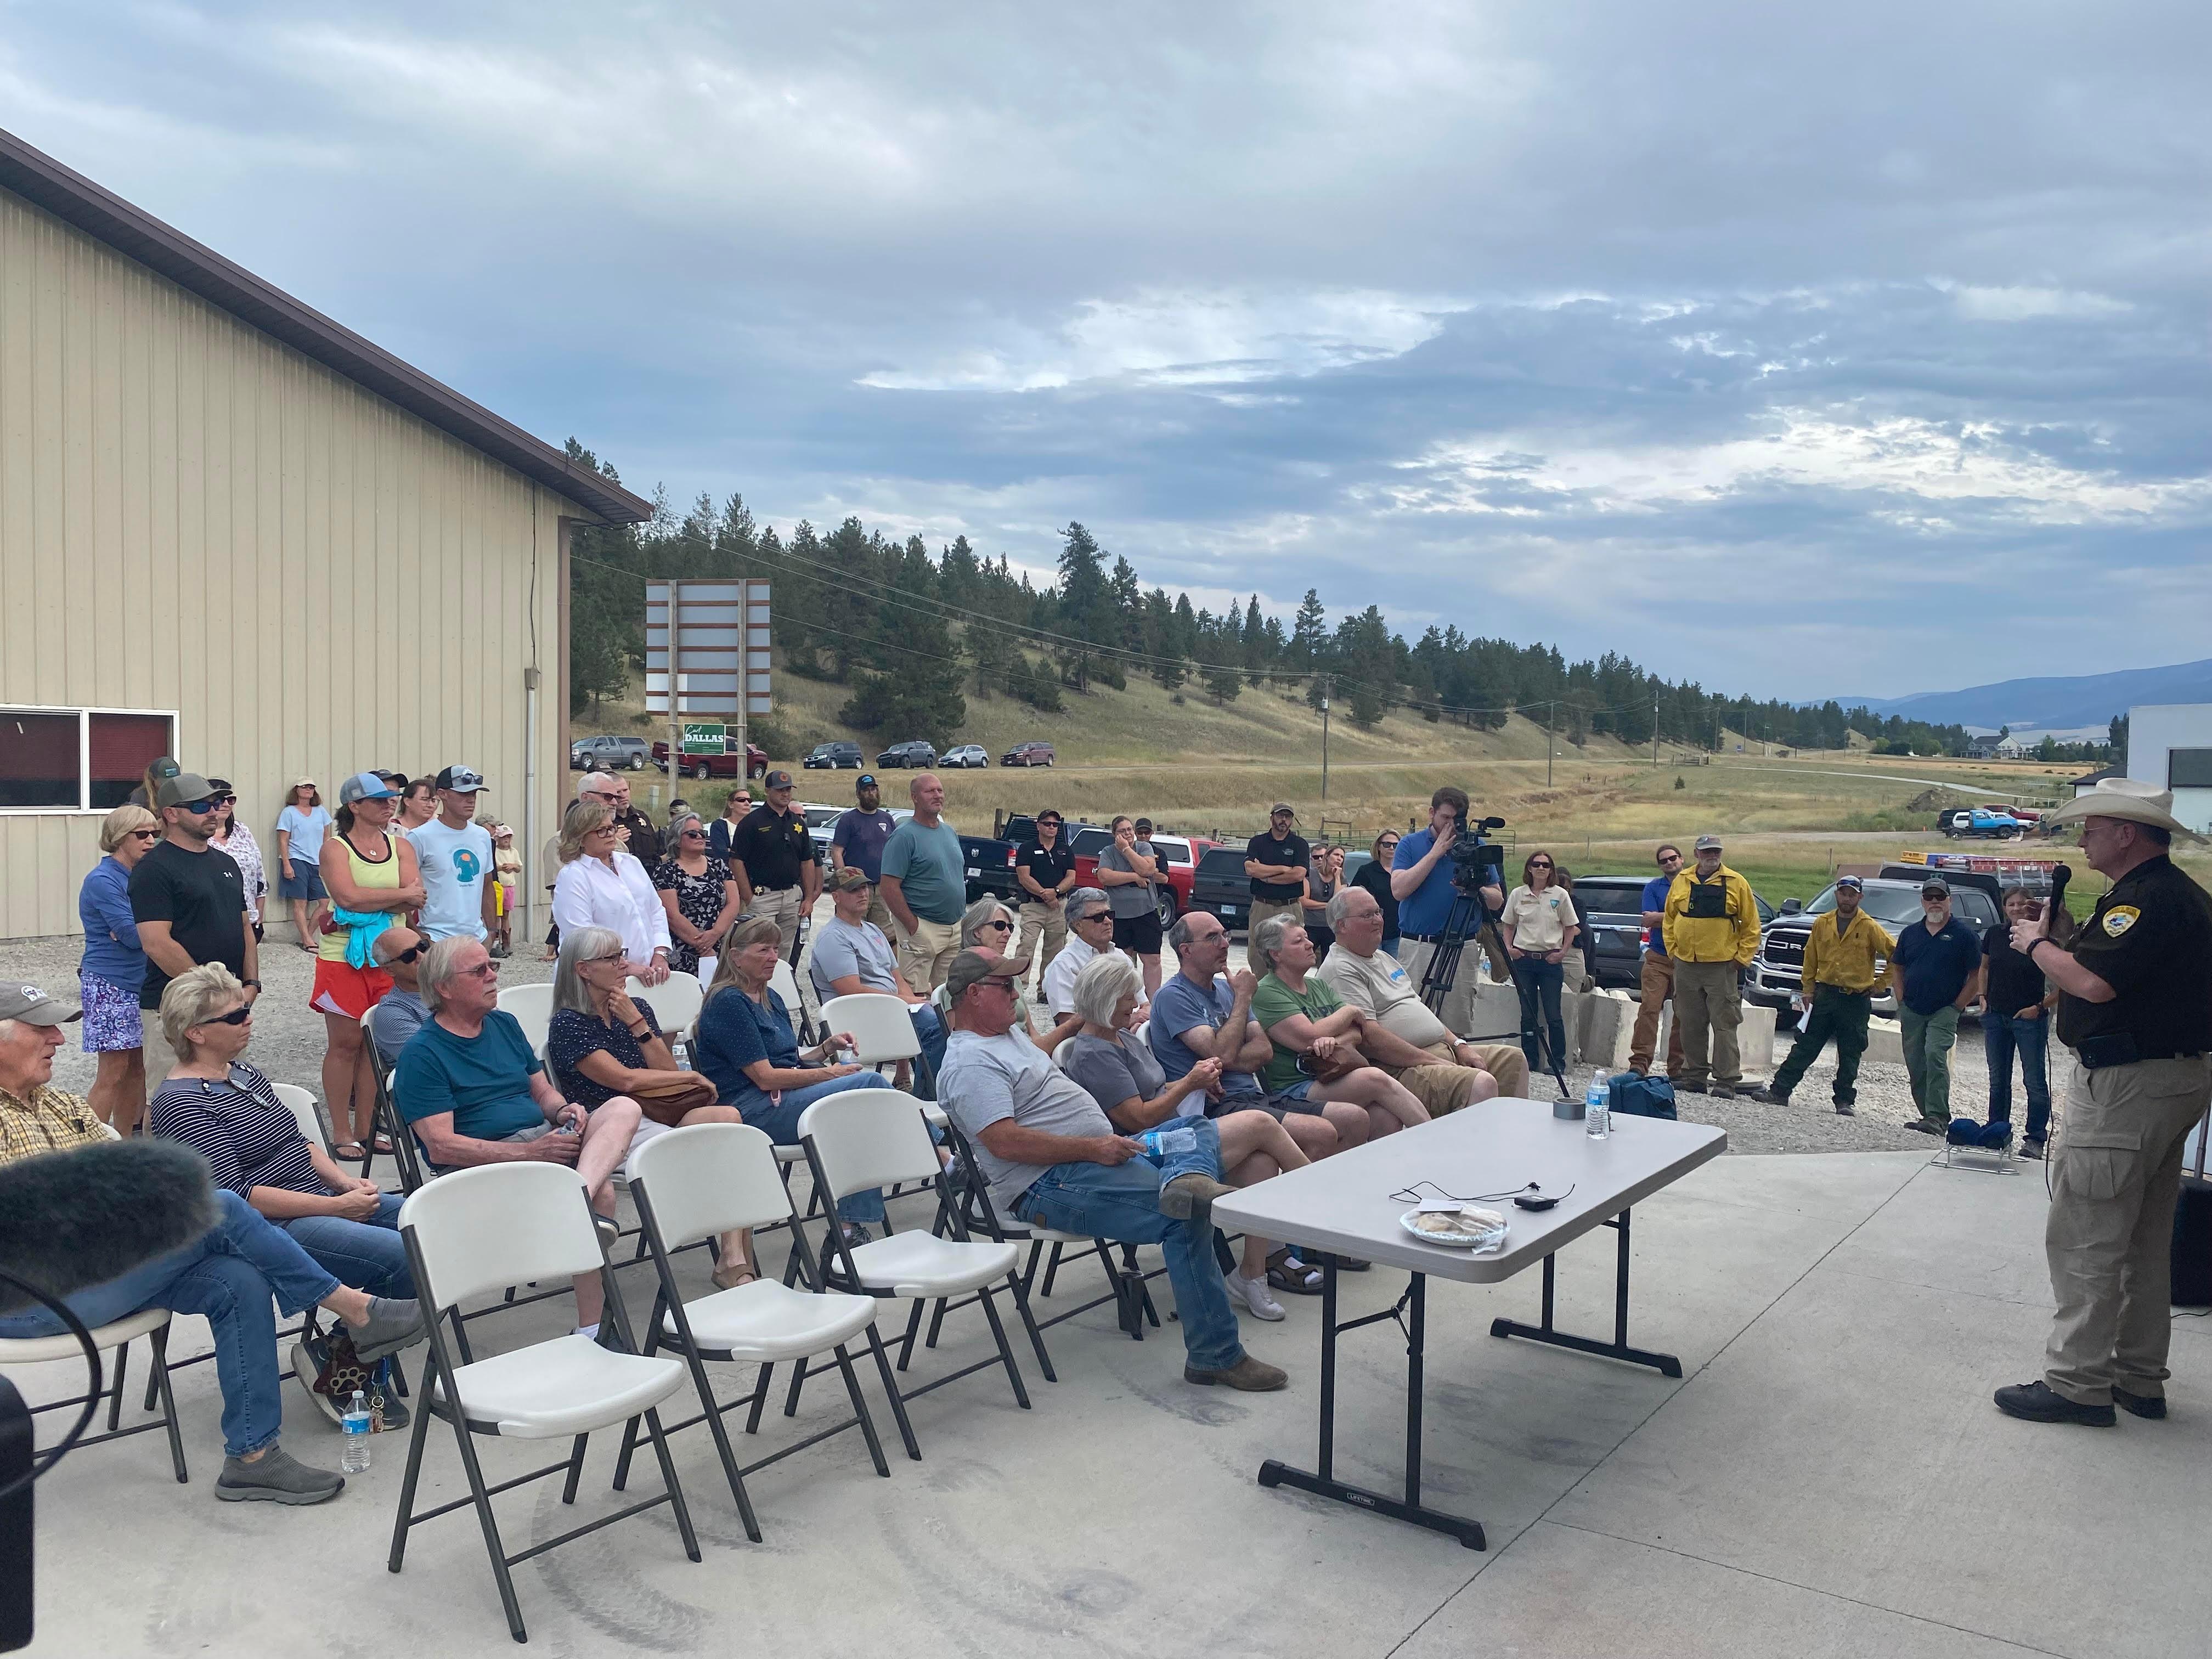 A public meeting was held 8/5 at the Tri-Lakes Fire Station